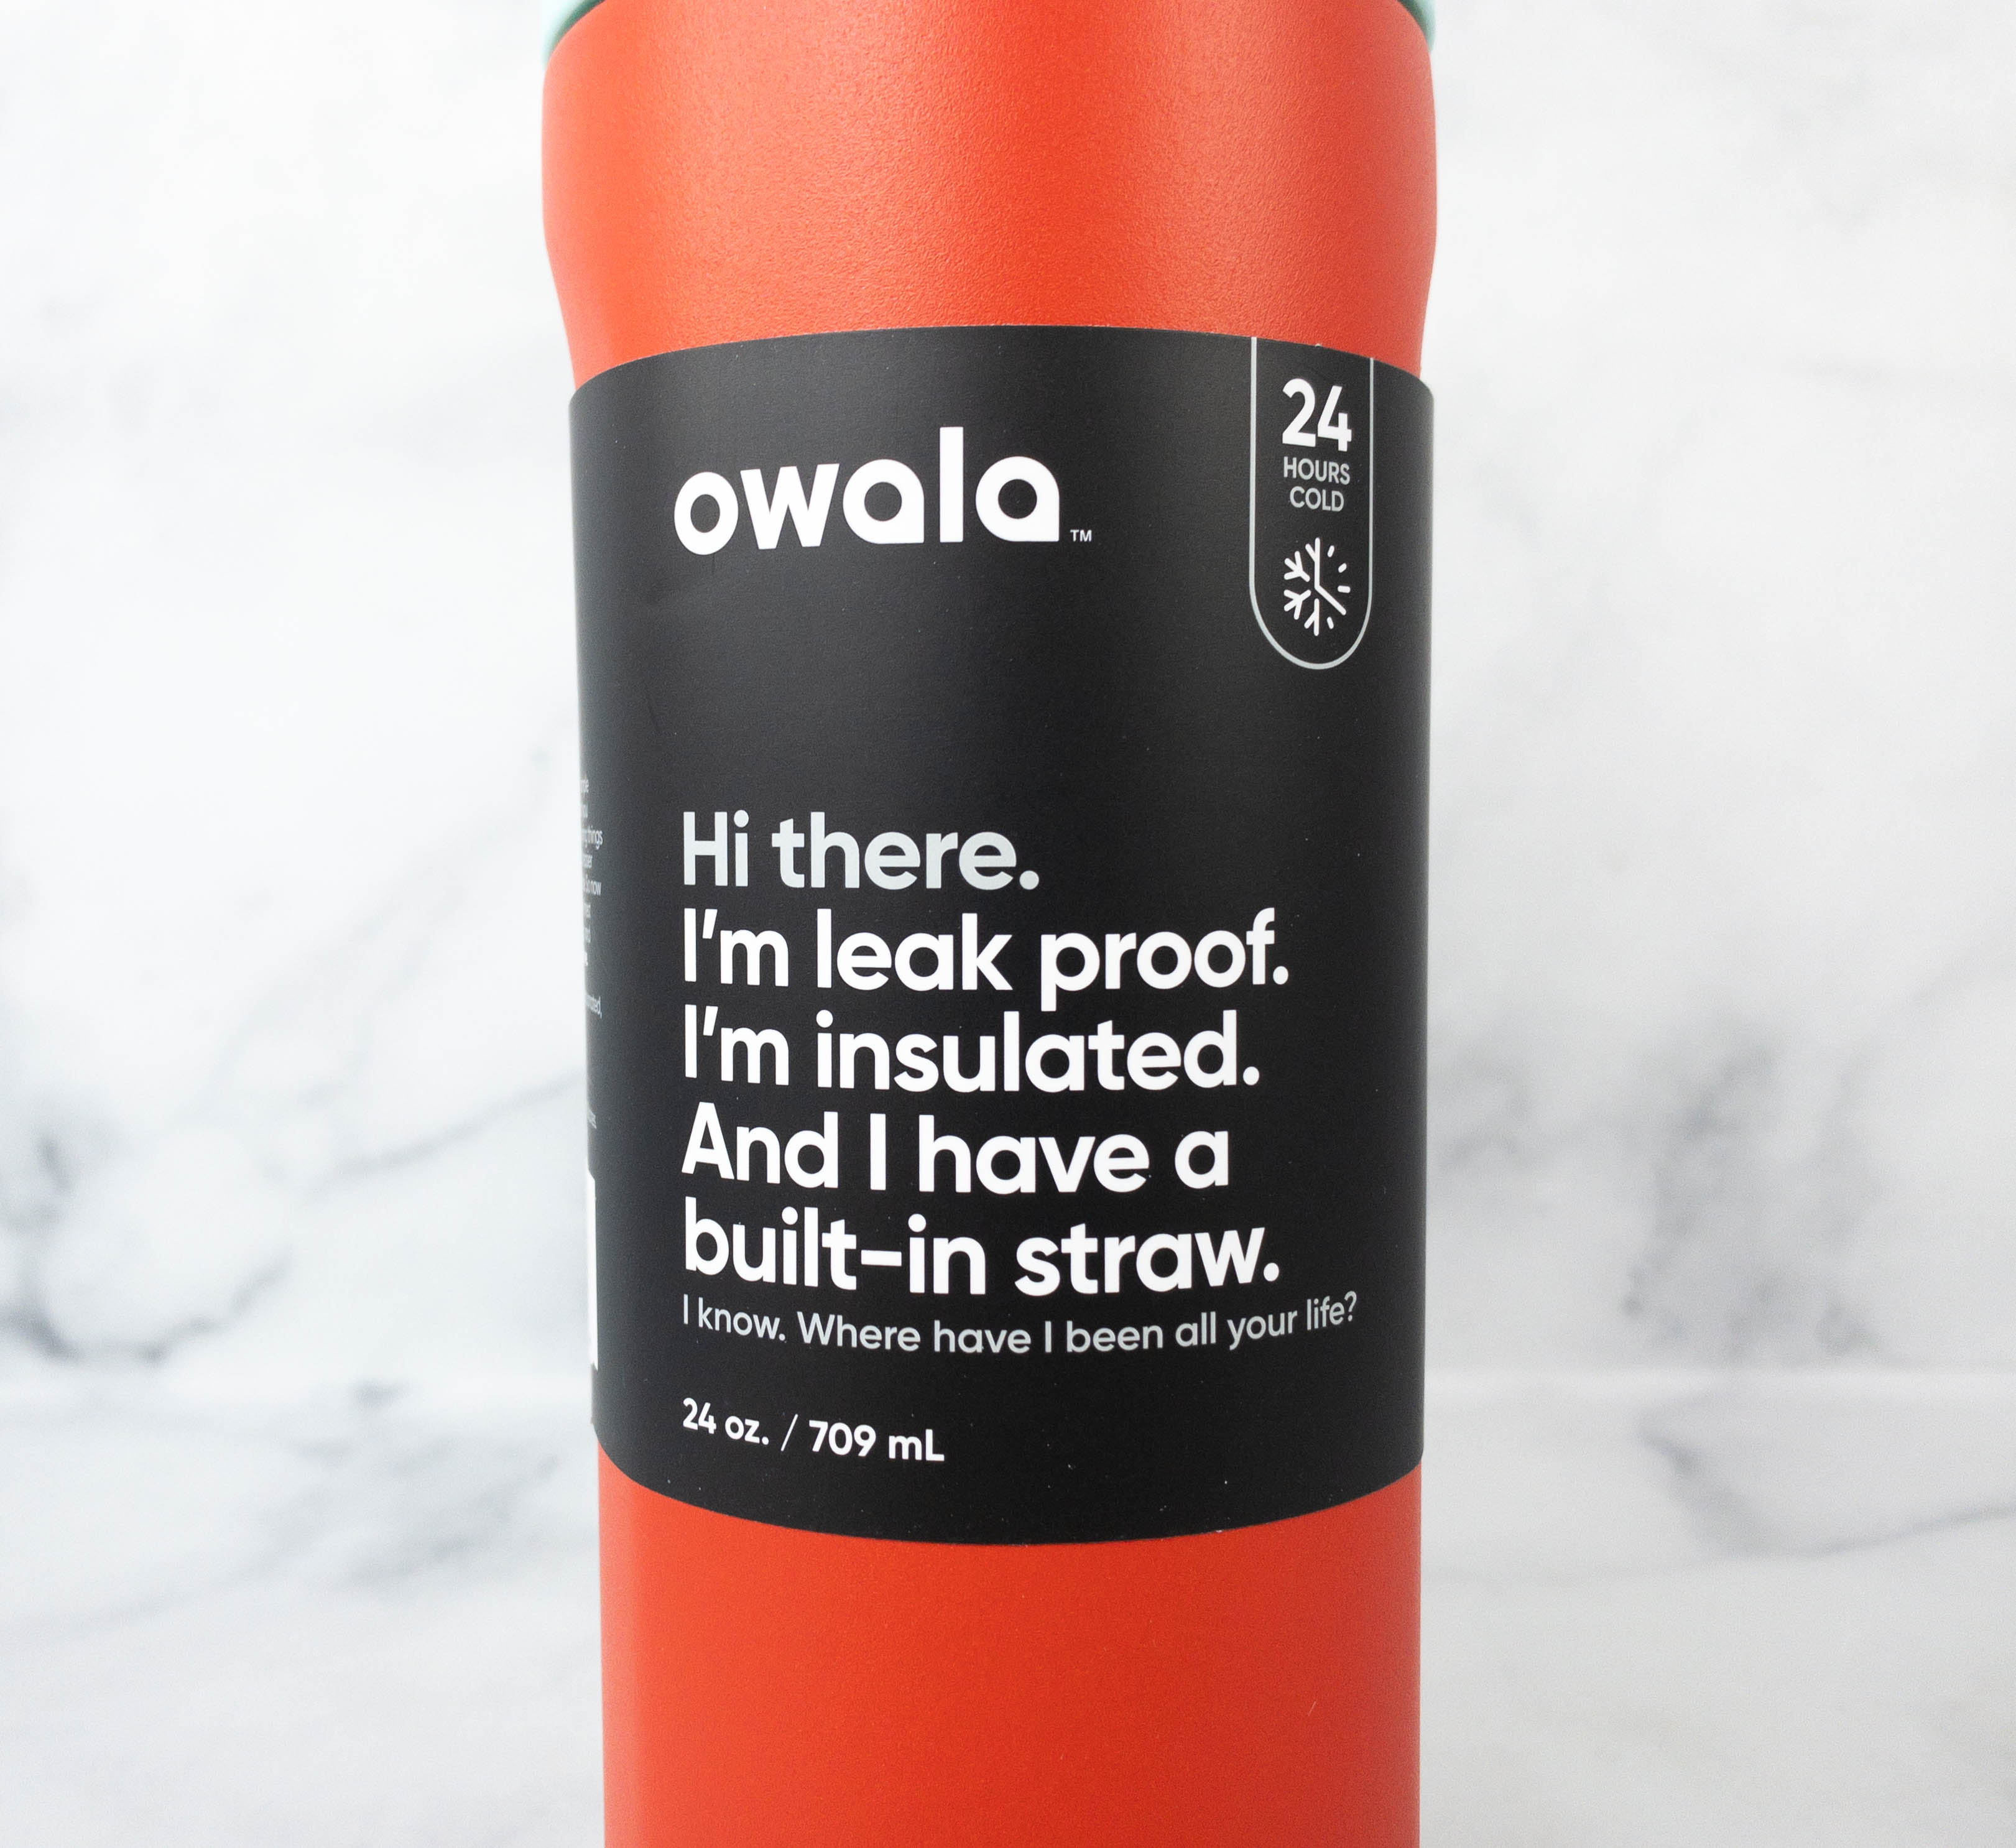 Finally found the limited edition Owala water bottle at Whole